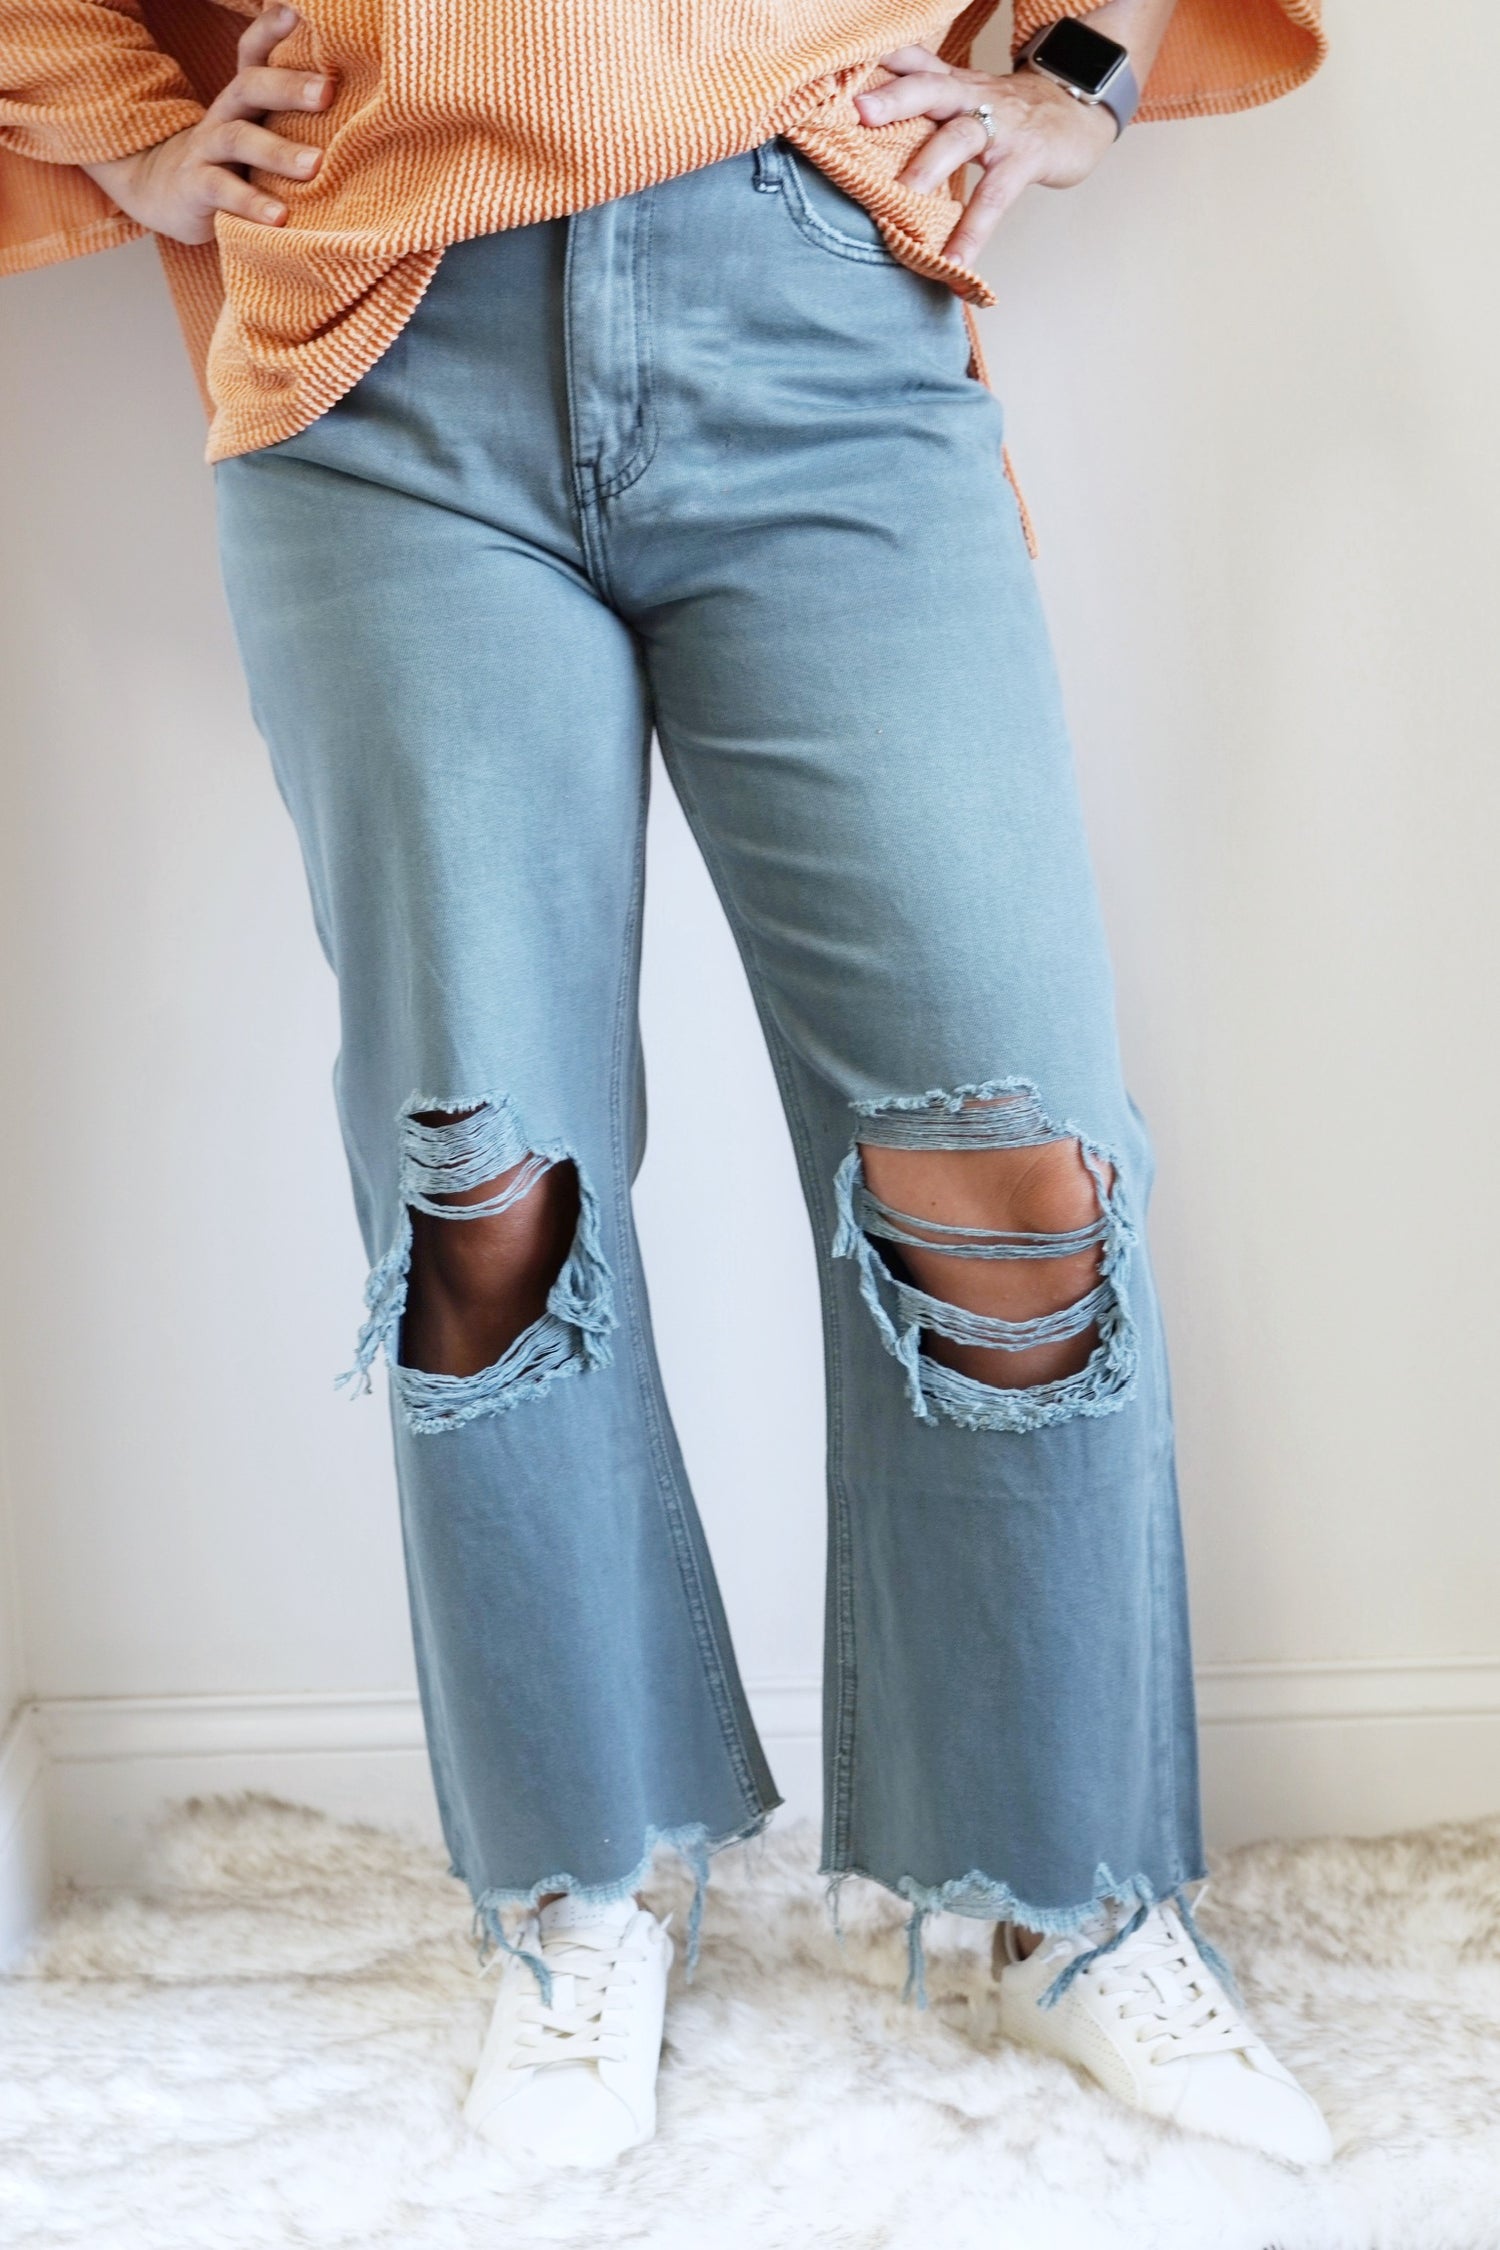 Valery Vintage Crop Flare Jeans High waisted Button/Zipper Closure Crop Flare Length Distressed Holes On Knee Length Color: Balsam Tight Fit on Waist, Flare Fit On Bottom Of Jeans Side And Back Pockets 100% Cotton